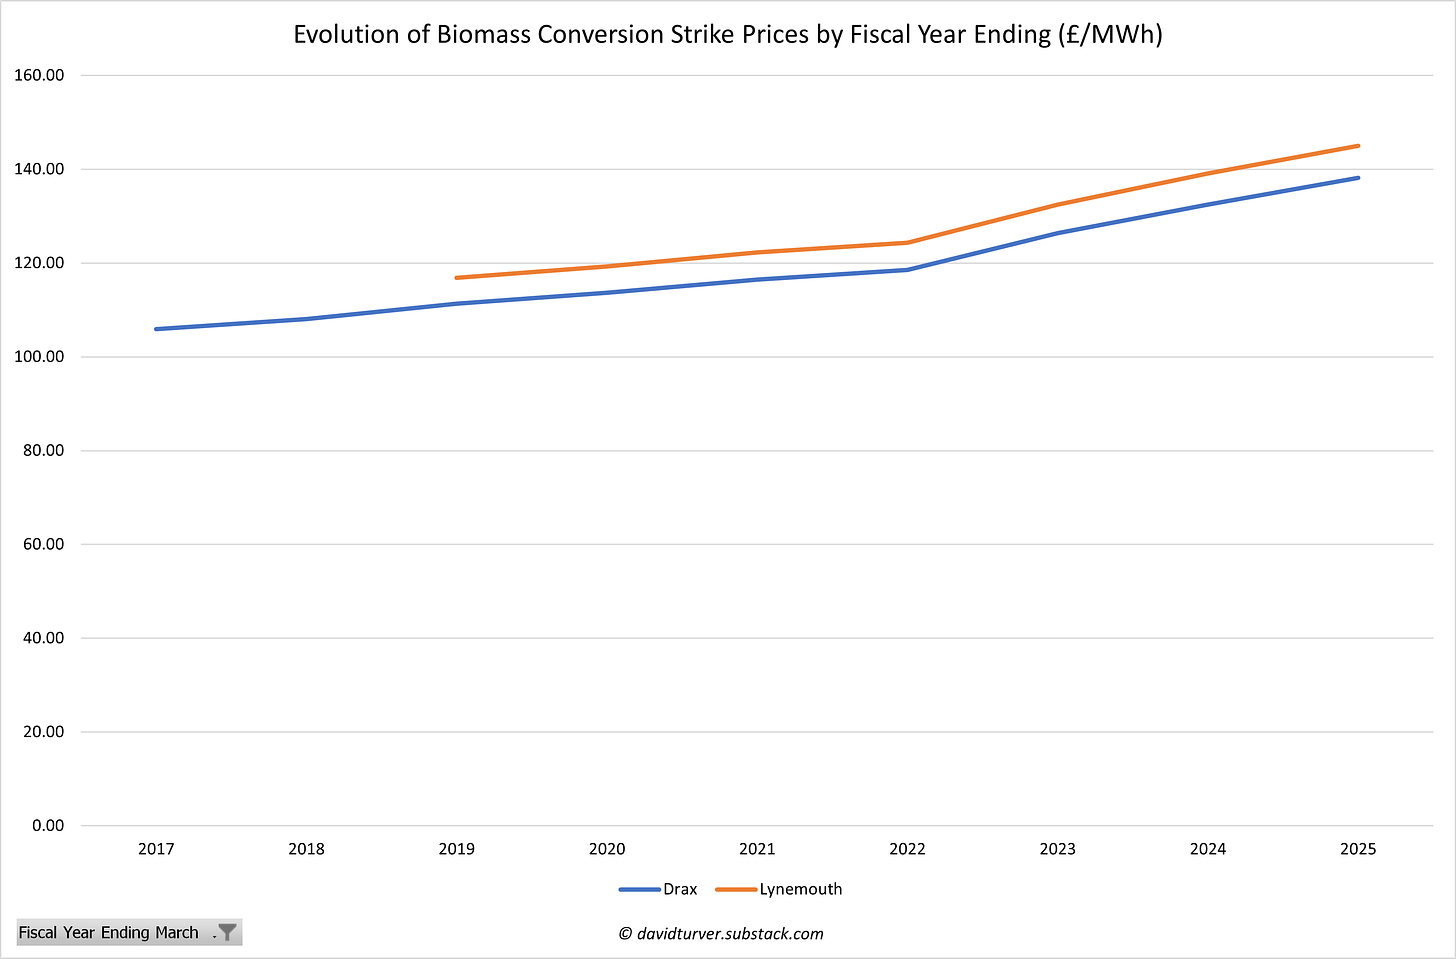 Figure 2 - Evolution of Biomass Strike Prices by Fiscal Year Ended (£ per MWh)